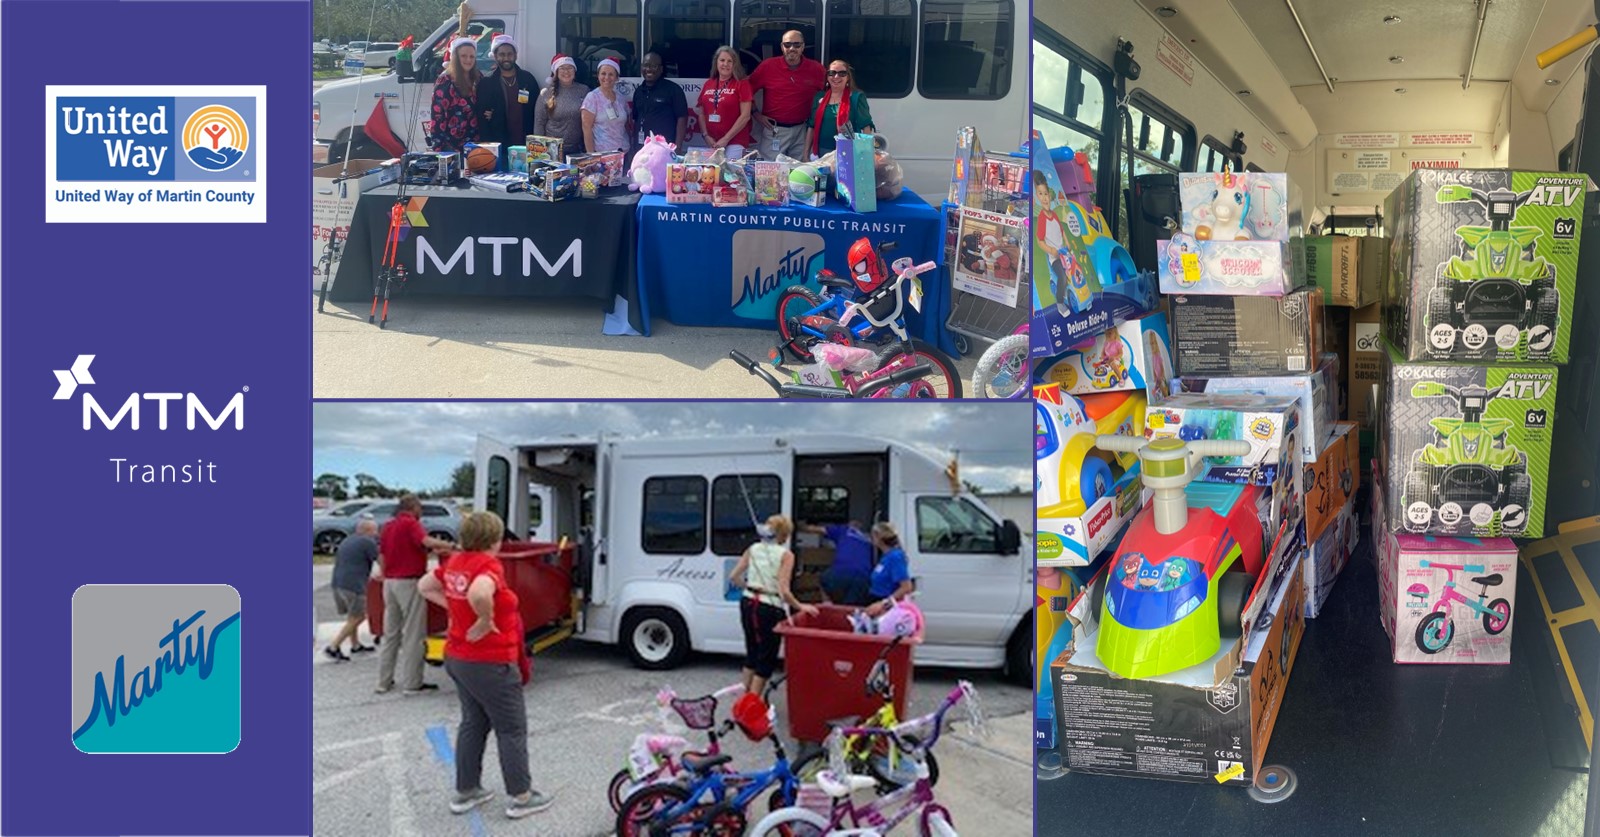 Our team in Martin County was recently invited to help “Stuff the Bus,” a coordinated effort between MTM Transit, Martin County Transit, the United Way of Martin County, Toys for Tots, and the Stuart Walmart.